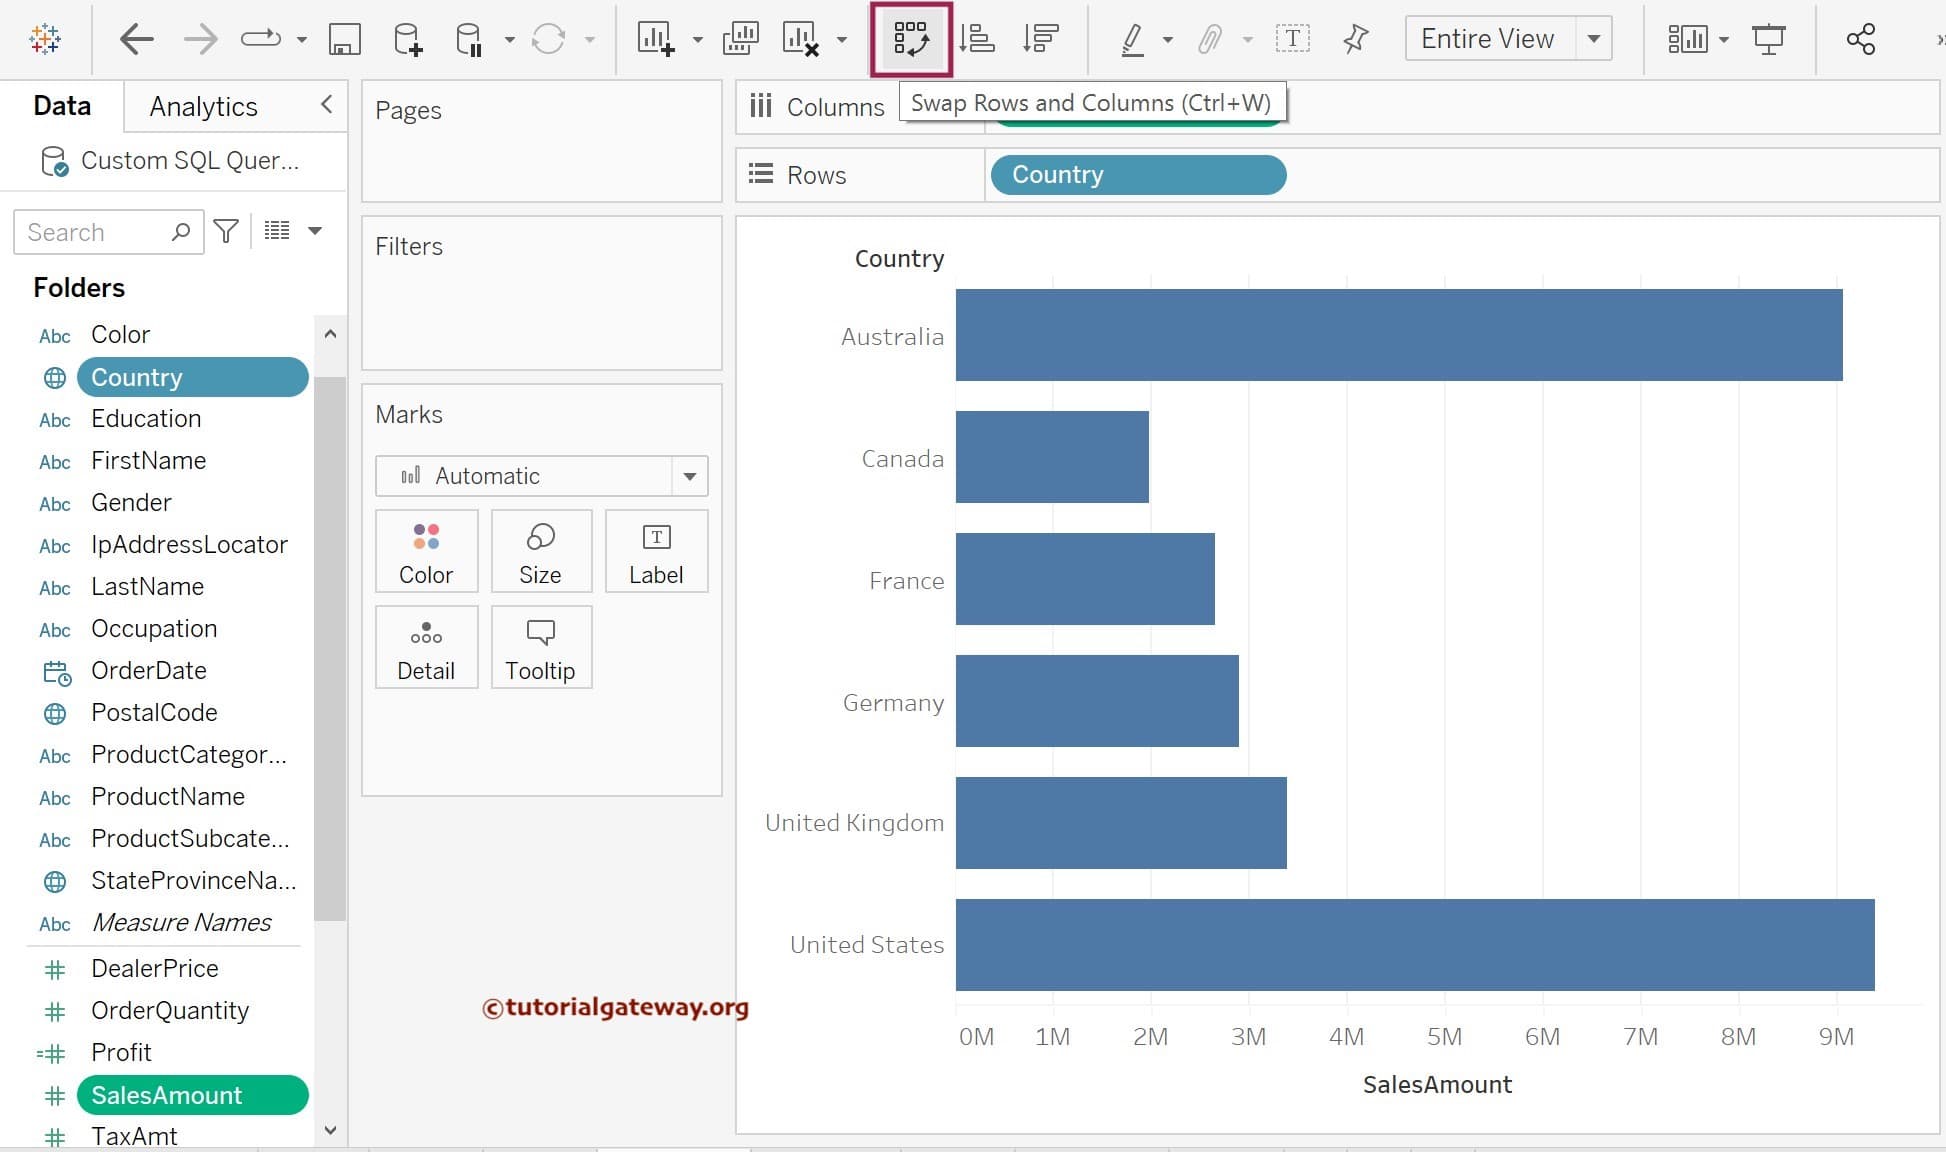 Data Labels or Sales on Top of the Tableau Bar Chart